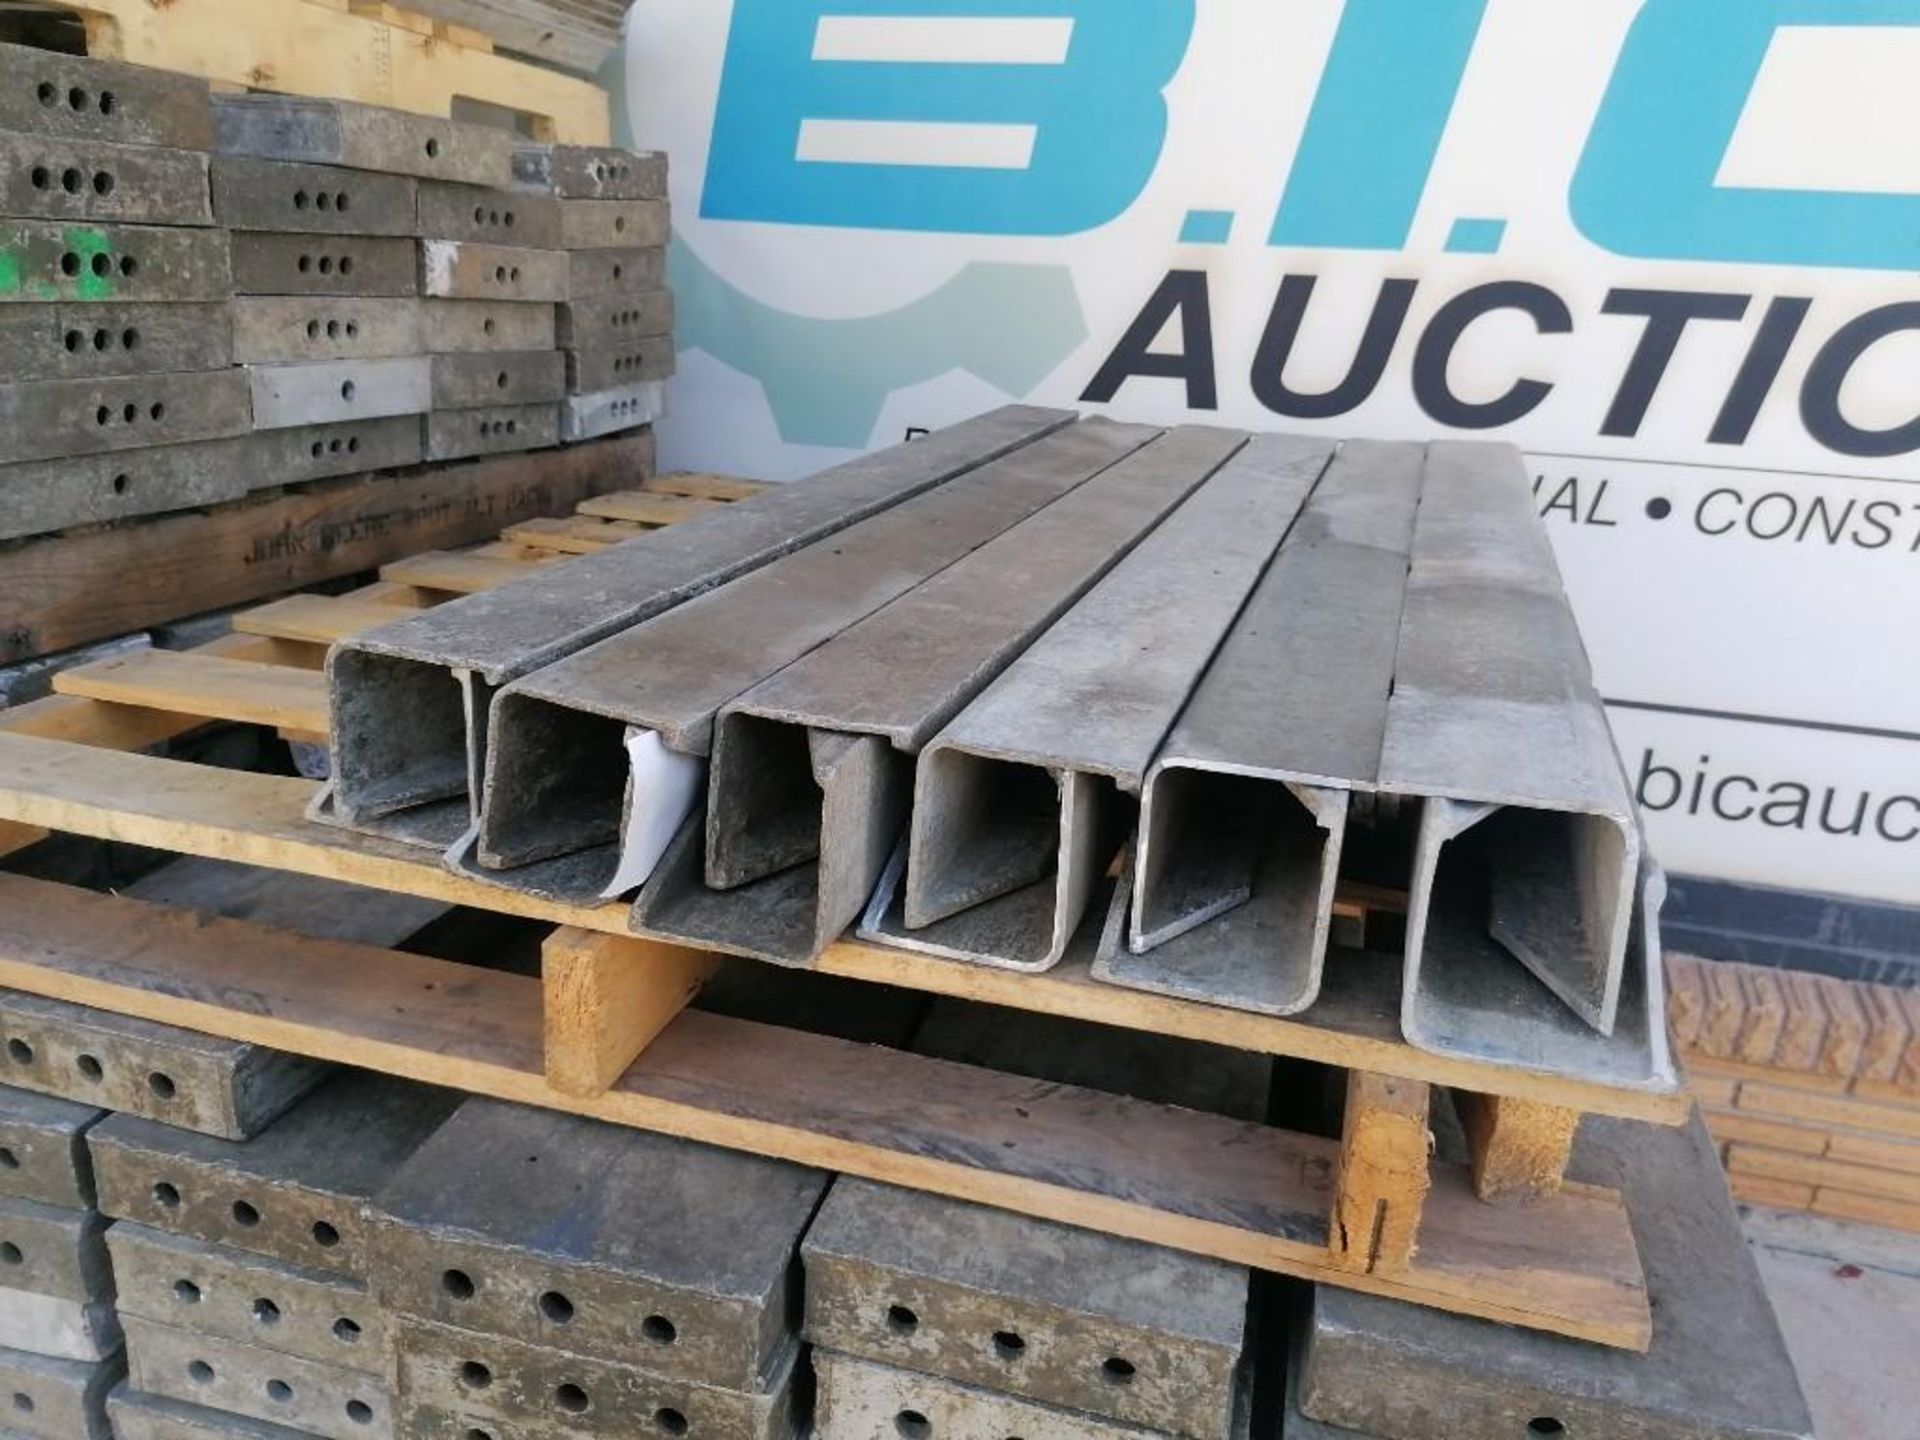 (12) 4" x 4" x 4' Full ISC Wall-Ties Aluminum Concrete Forms, Smooth 6-12 Hole Pattern. Located at